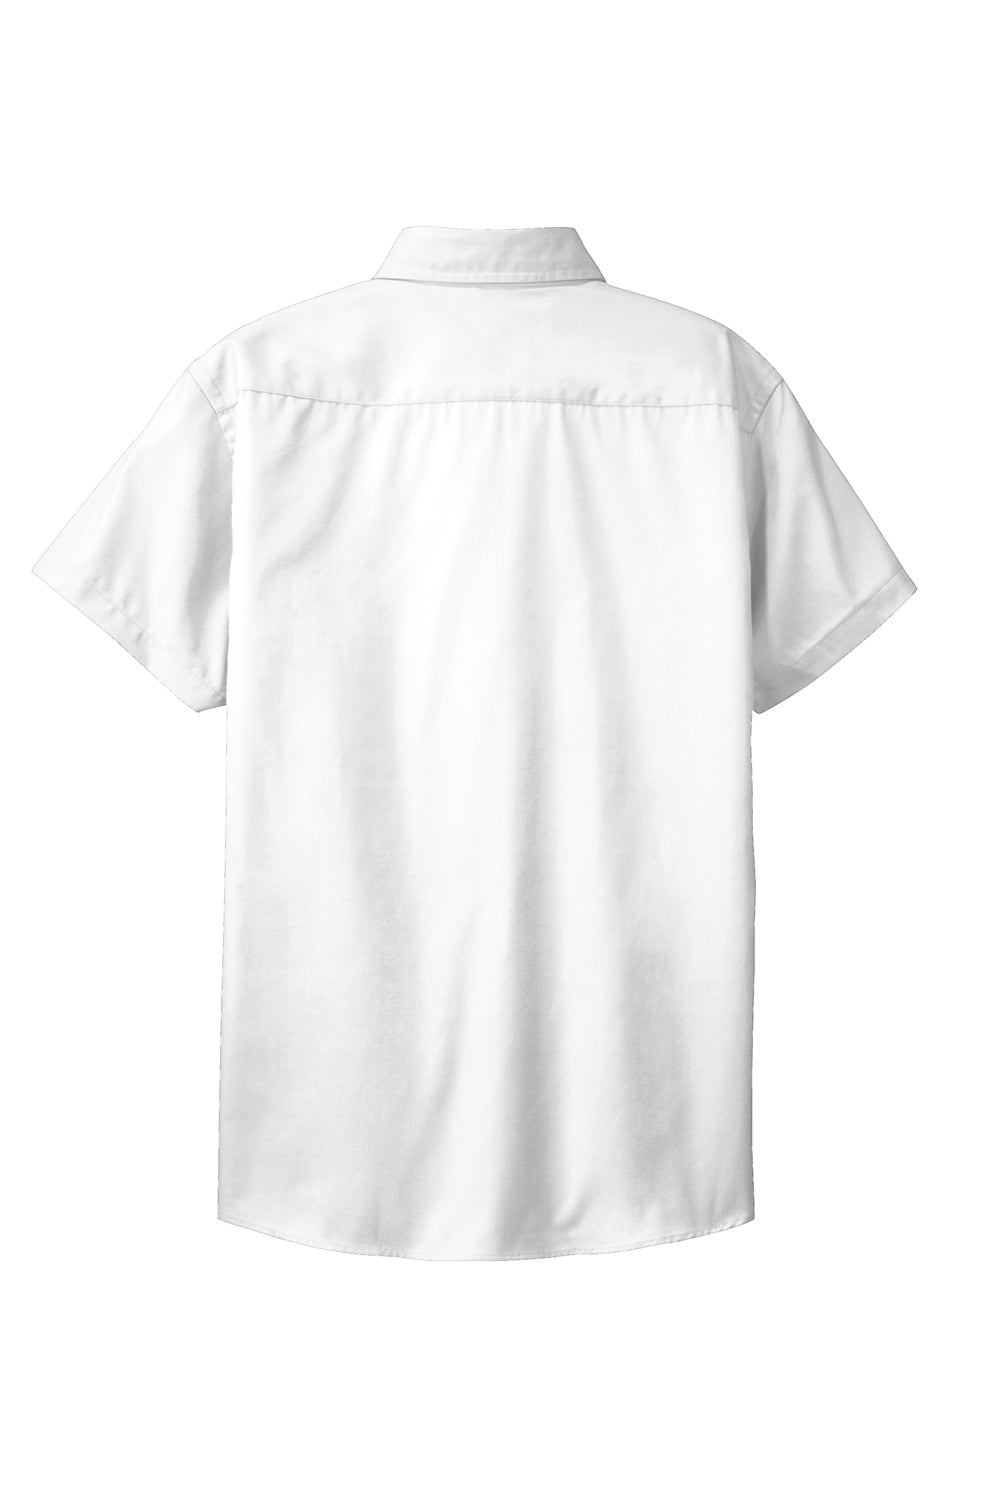 Port Authority L508 Womens Easy Care Wrinkle Resistant Short Sleeve Button Down Shirt White Flat Back